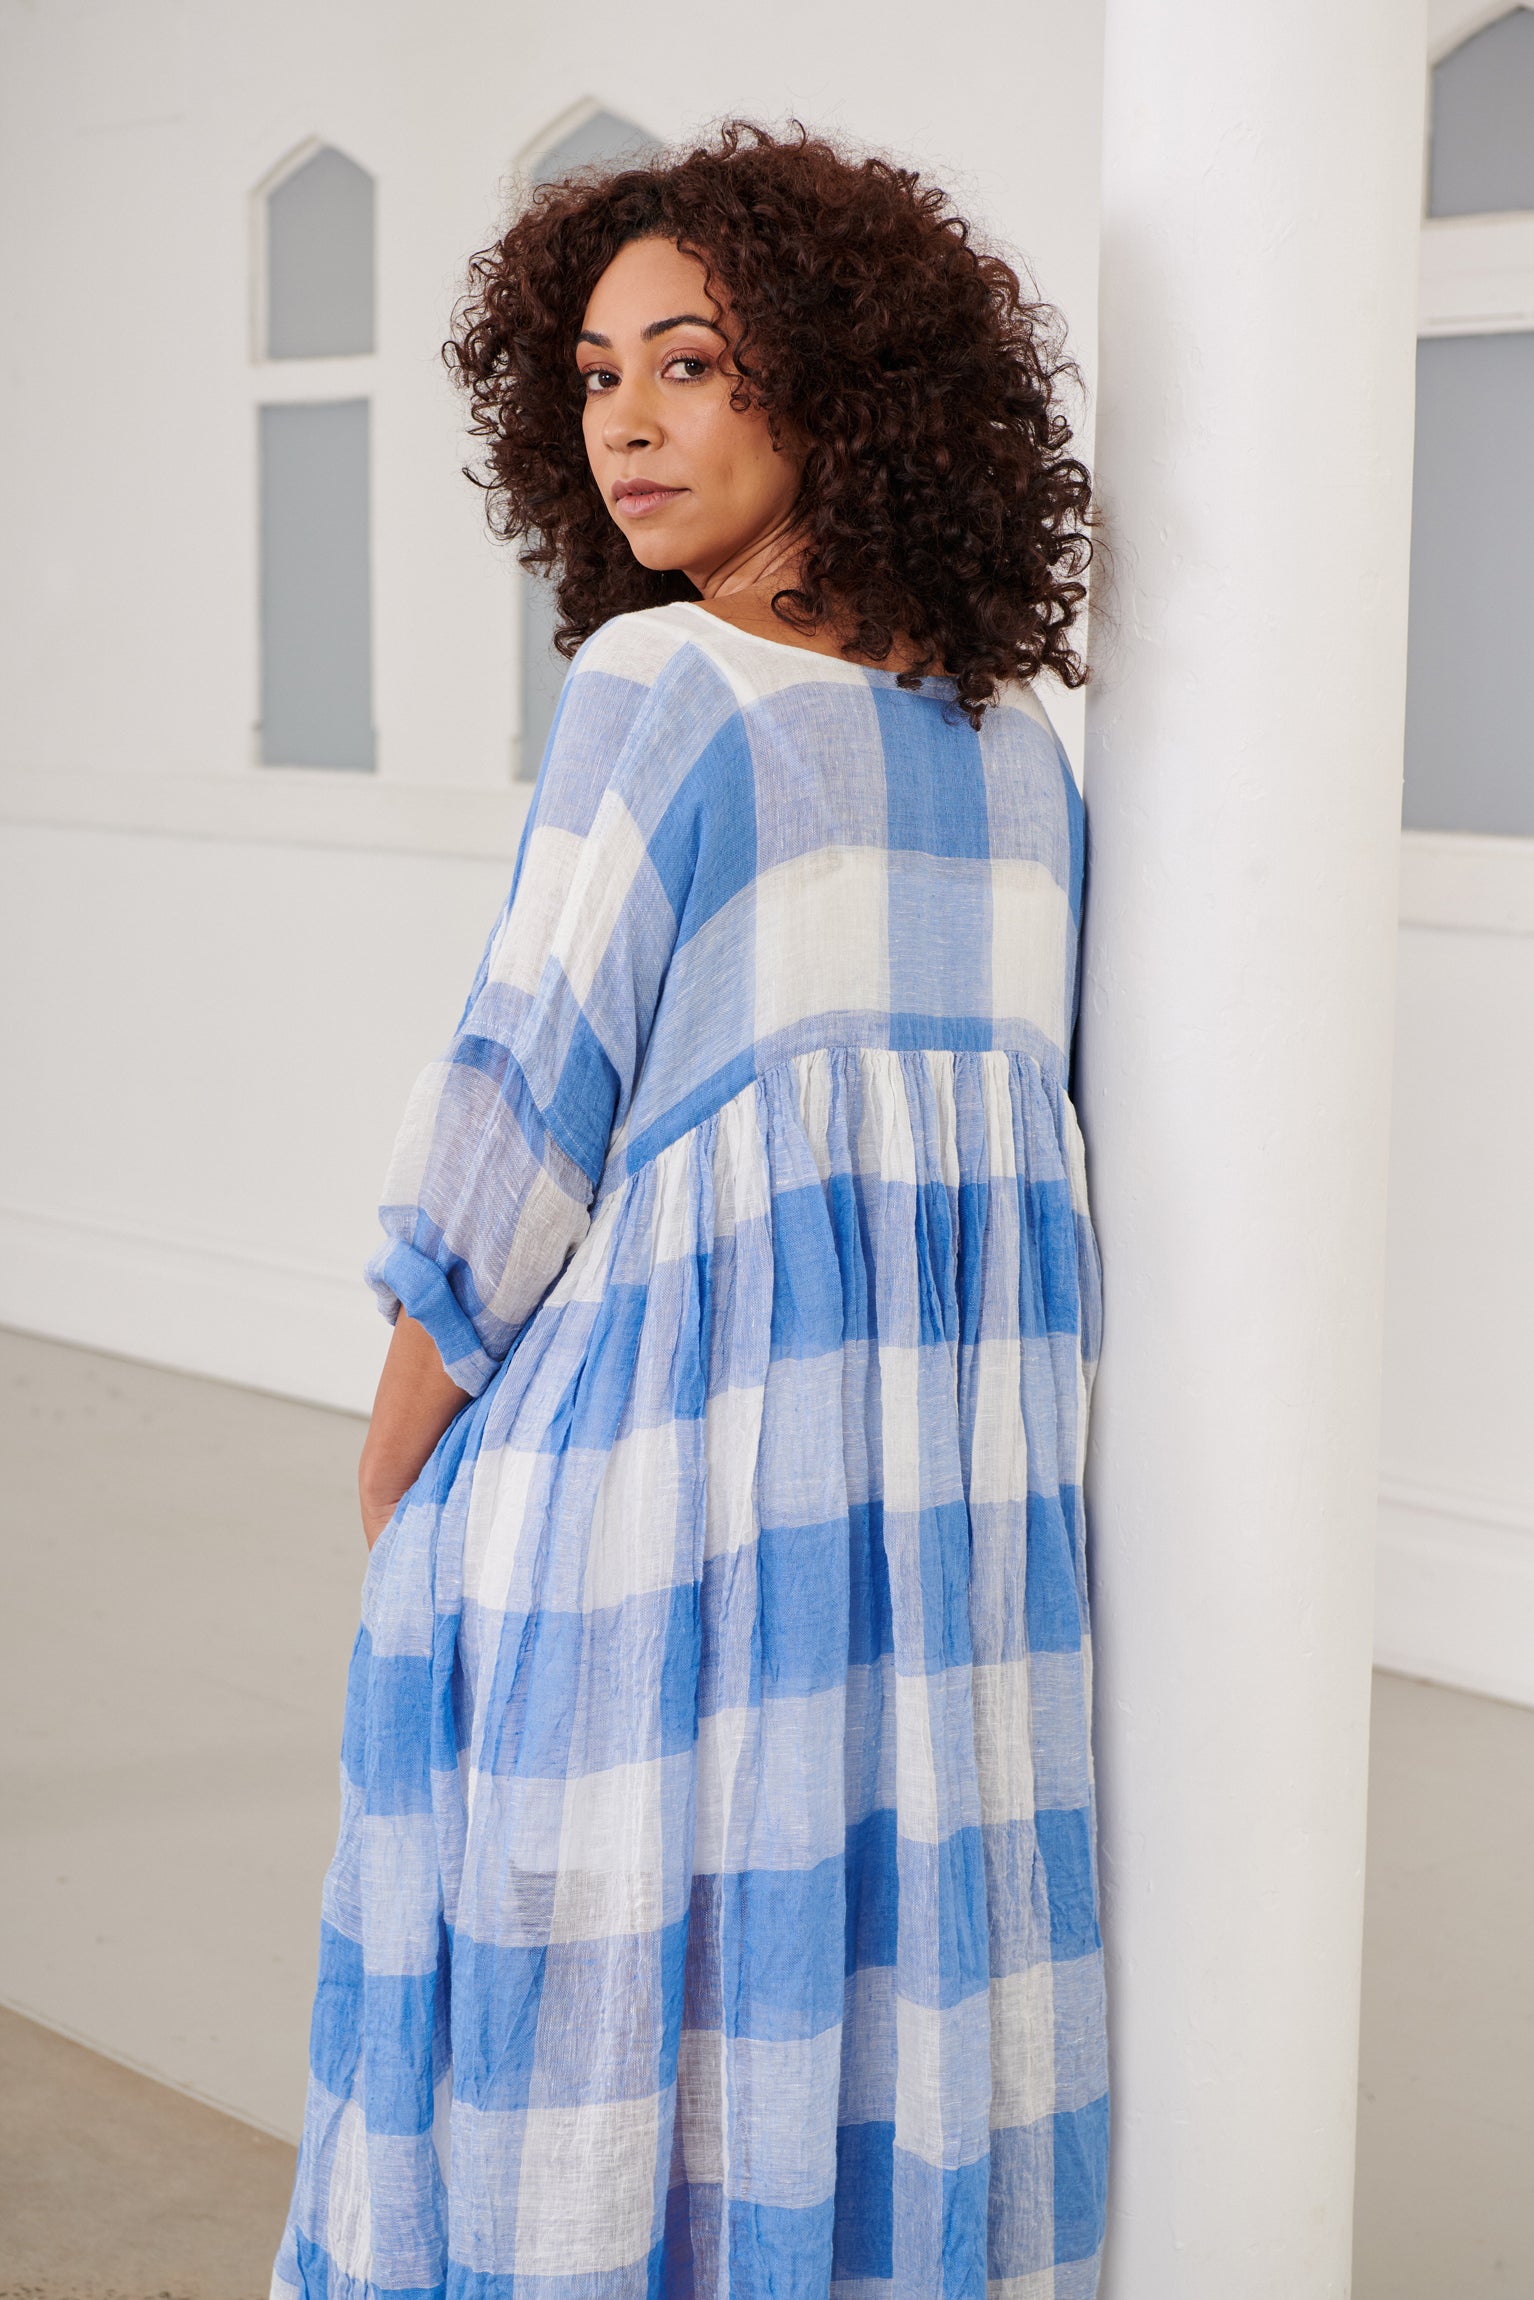 A MegbyDesign model is wearing a blue and white gingham soft gauze linen tunic dress